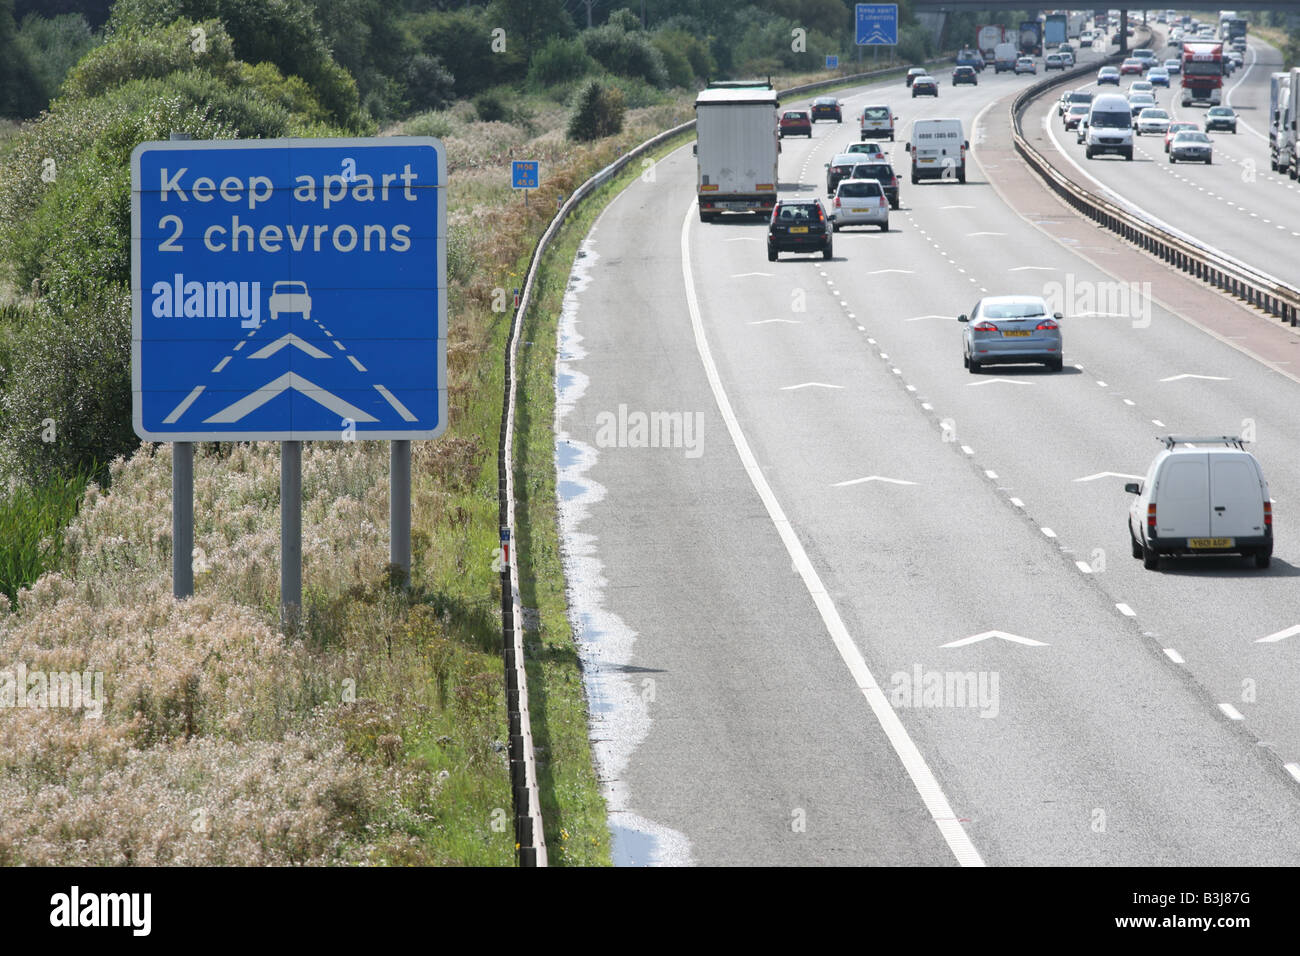 Keep apart 2 chevrons motorway road sign and markings, M56 Northwest England Stock Photo